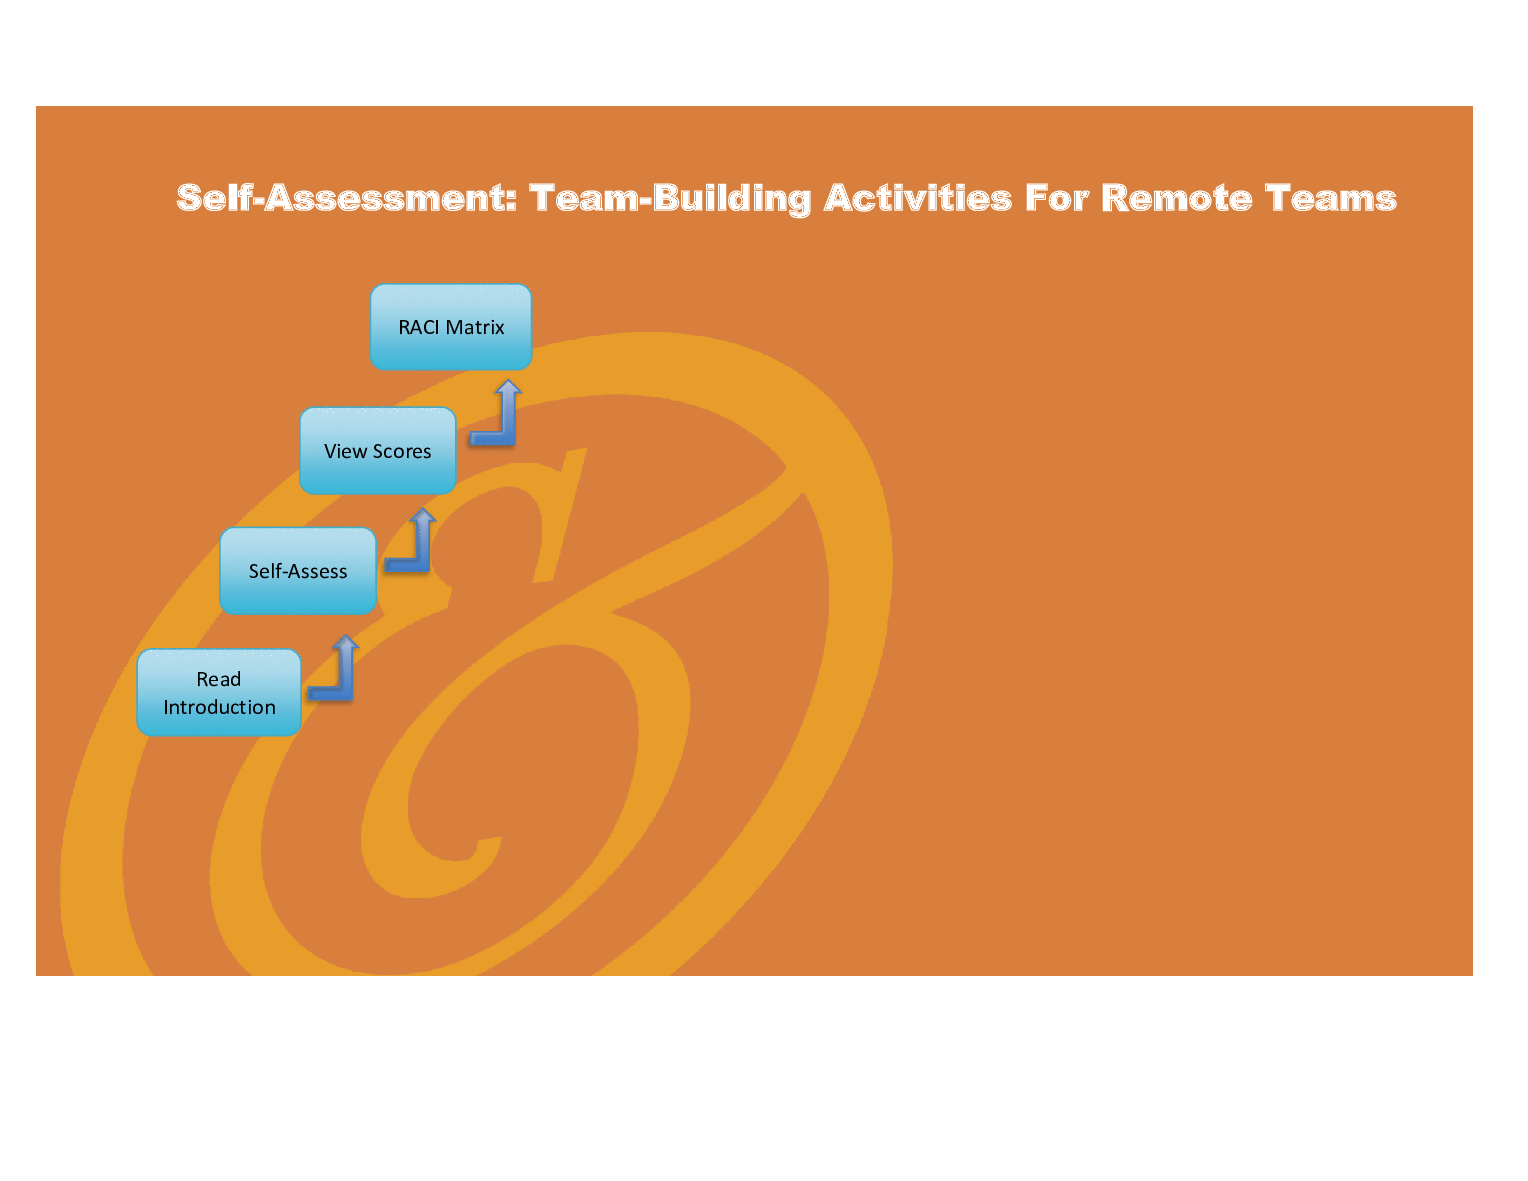 Team-Building Activities for Remote Teams - Implementation Toolkit